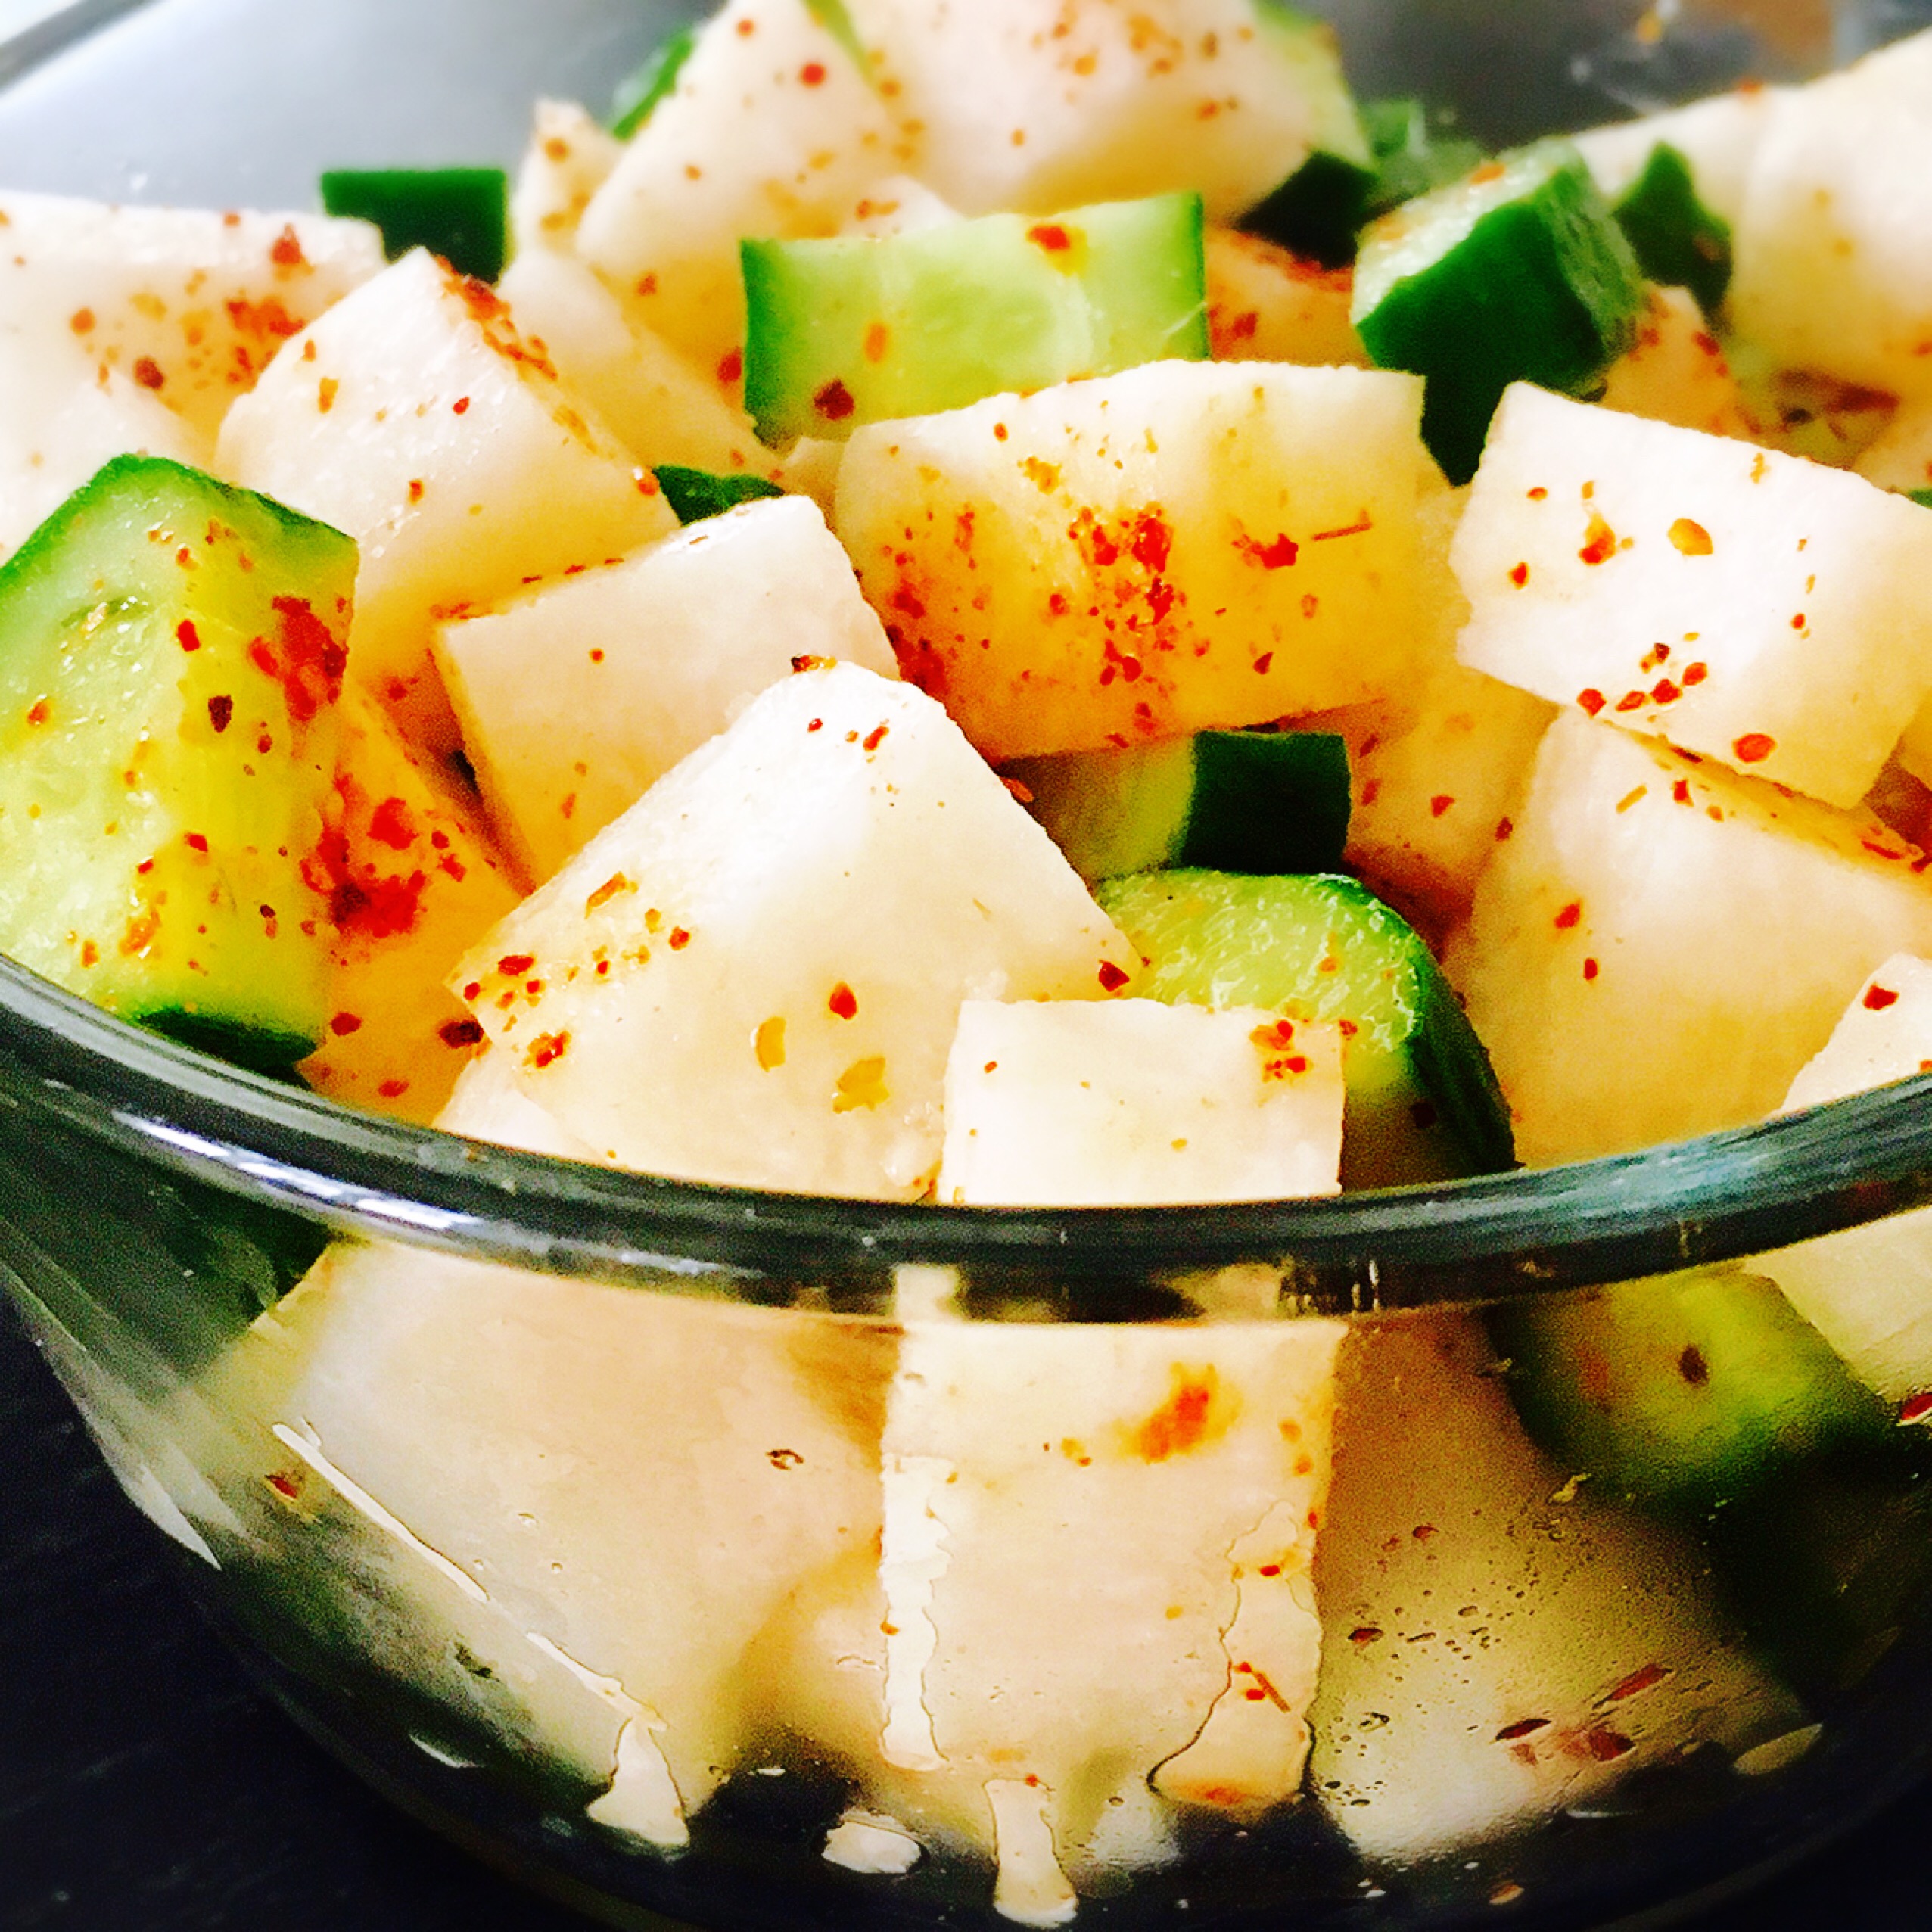 This light and healthy Jicama Tajin Chili Powder Salad is a quick & easy side or snack!